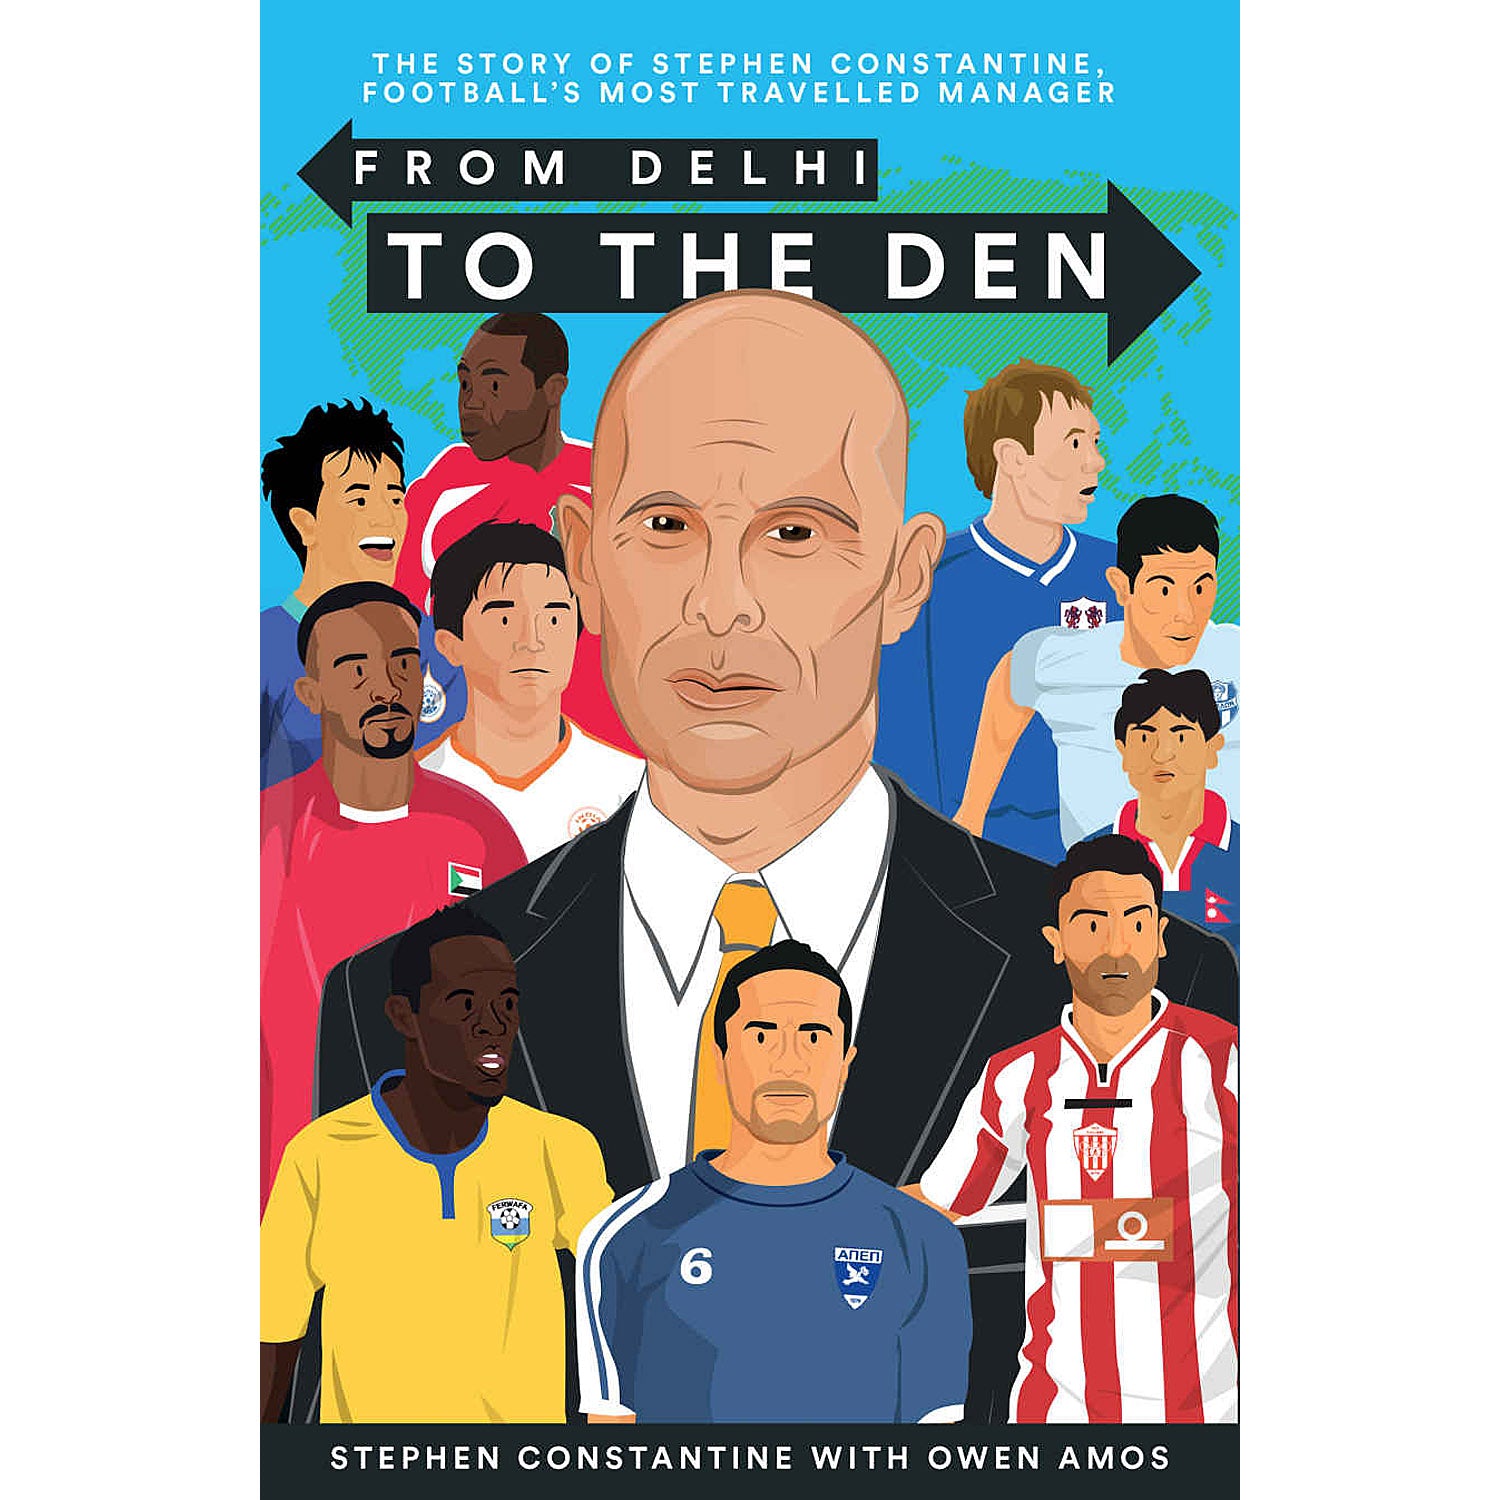 From Delhi to The Den – The Story of Stephen Constantine, Football's Most Travelled Manager – SIGNED